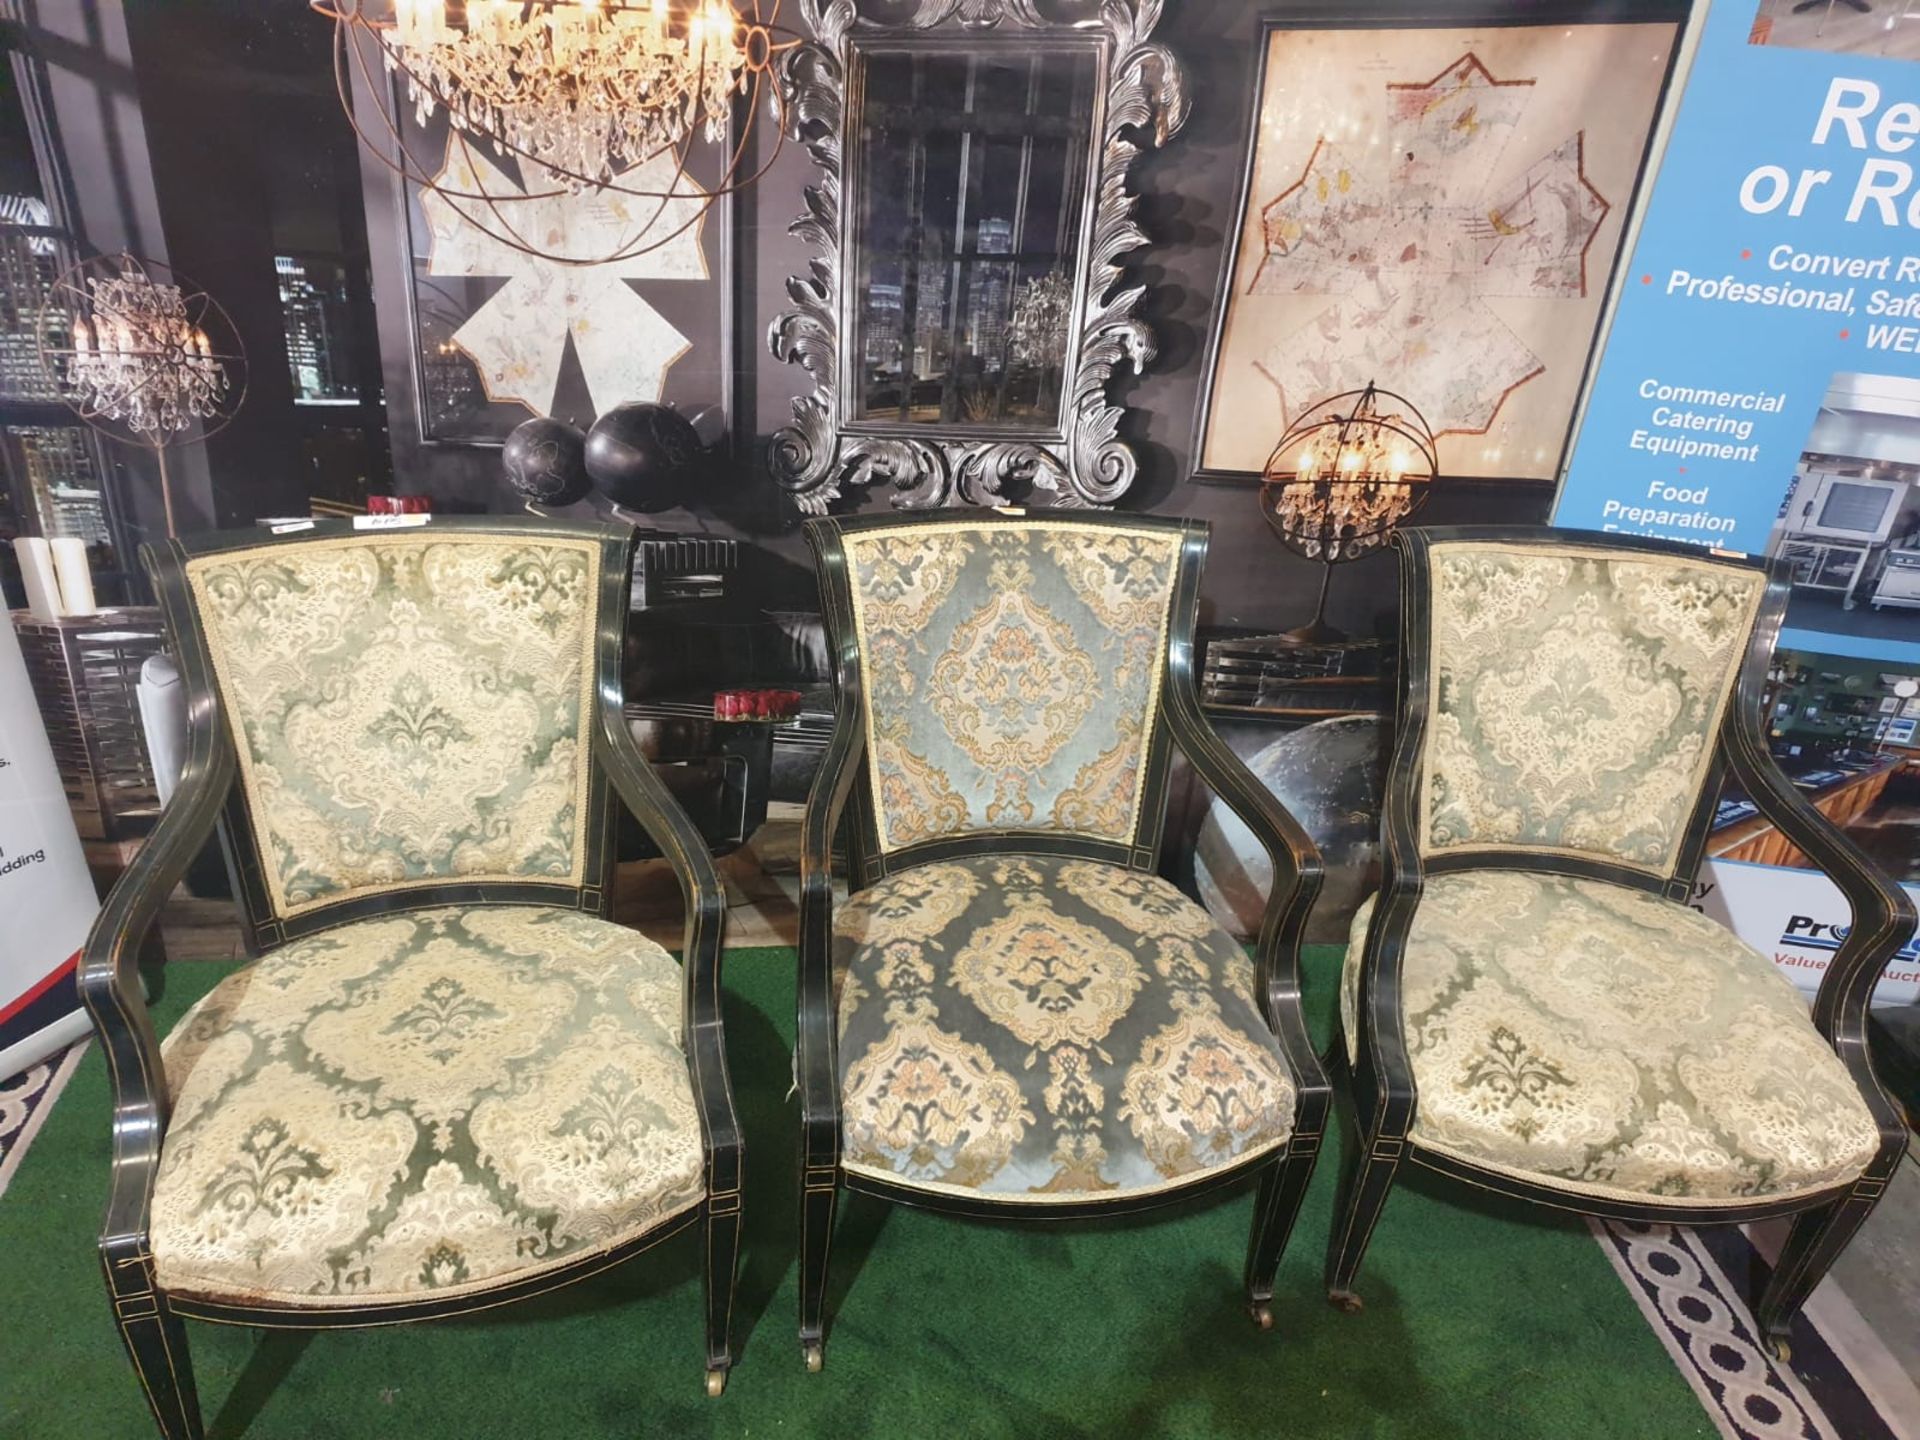 A set of 3 x George III/Neoclassical Style Carver Chairs. Most likely produced during the - Image 3 of 3